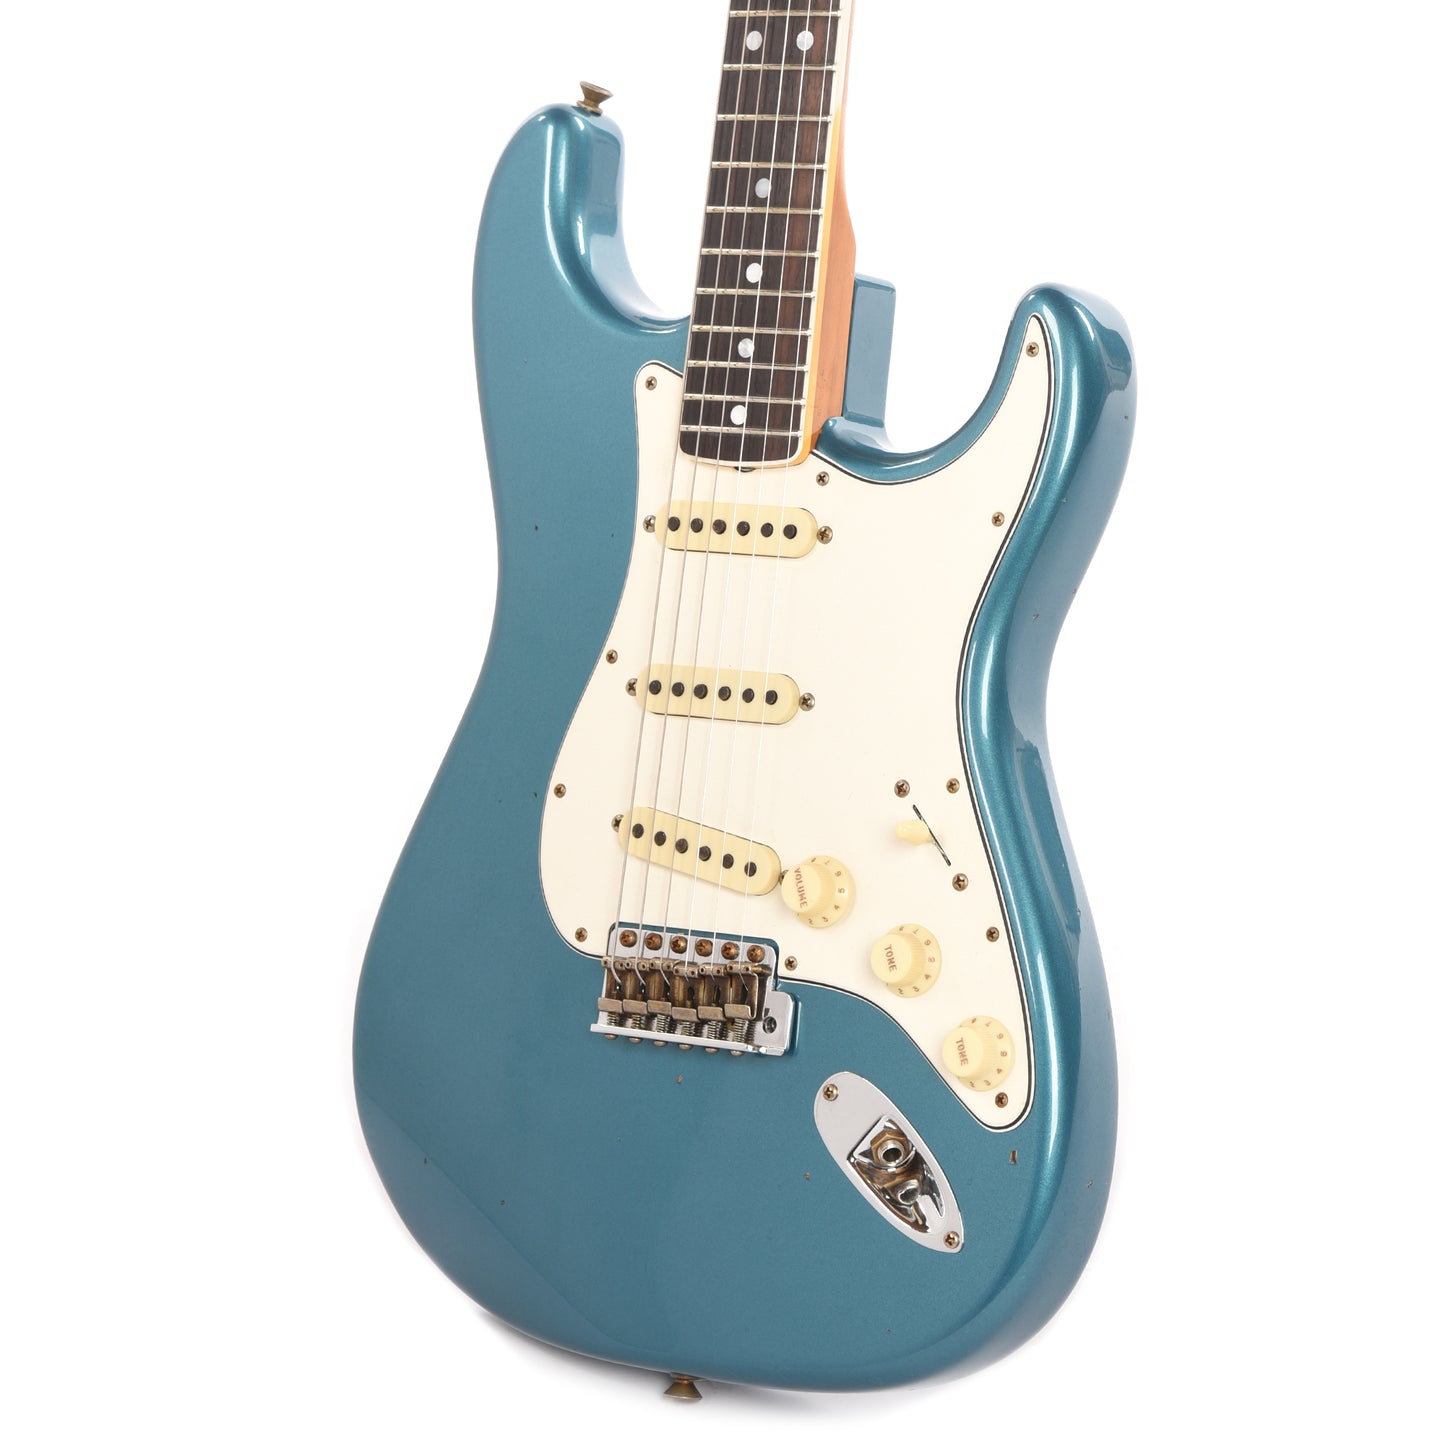 Fender Custom Shop 1965 Stratocaster "Chicago Special" Journeyman Aged Ocean Turquoise w/Roasted Bound Neck